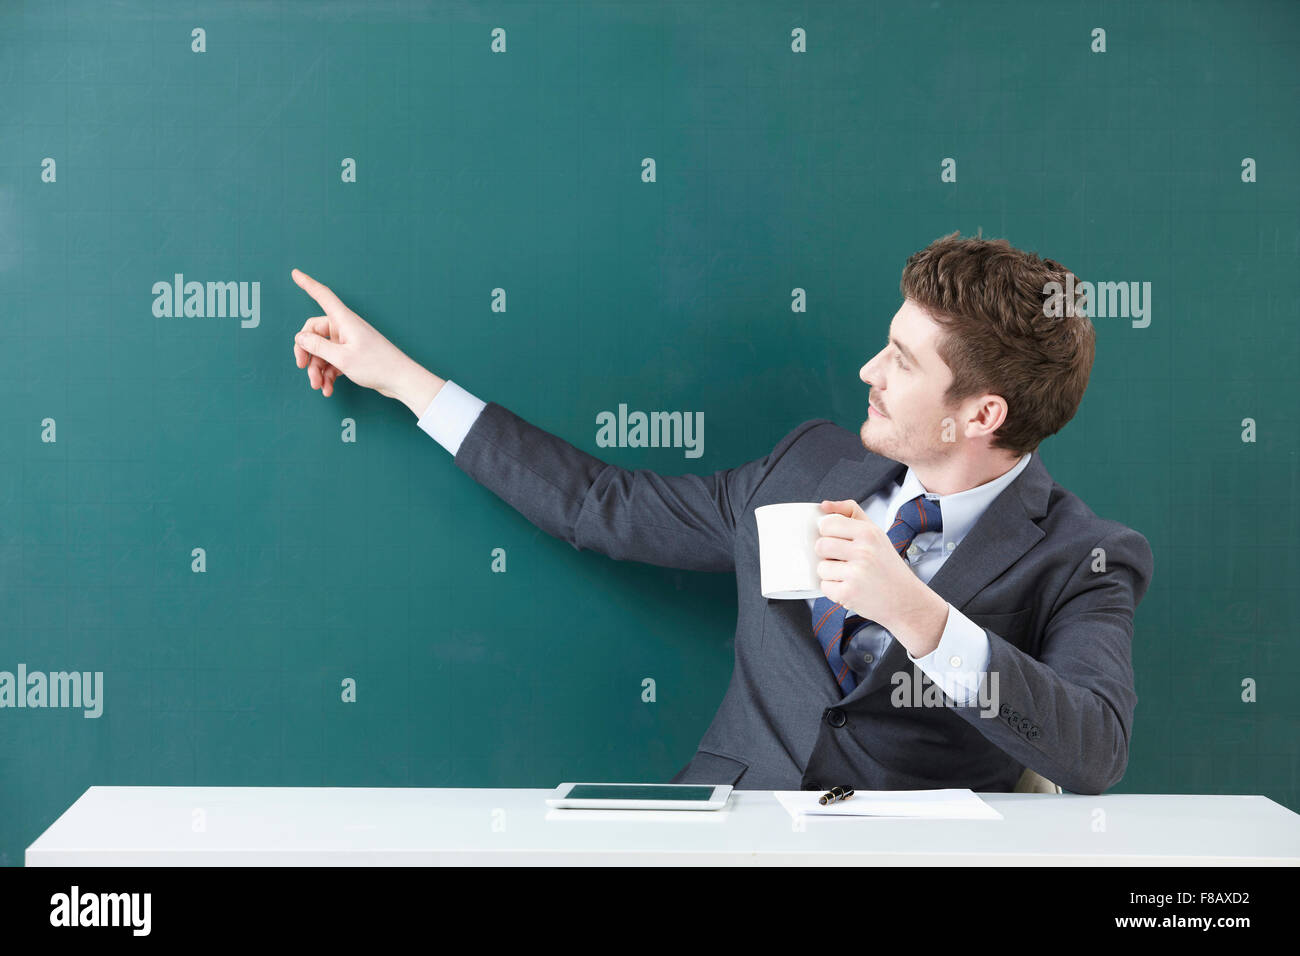 Portrait of man in suit pointing at blackboard with a mug in his hand and tablet, pen, and paper on the table Stock Photo